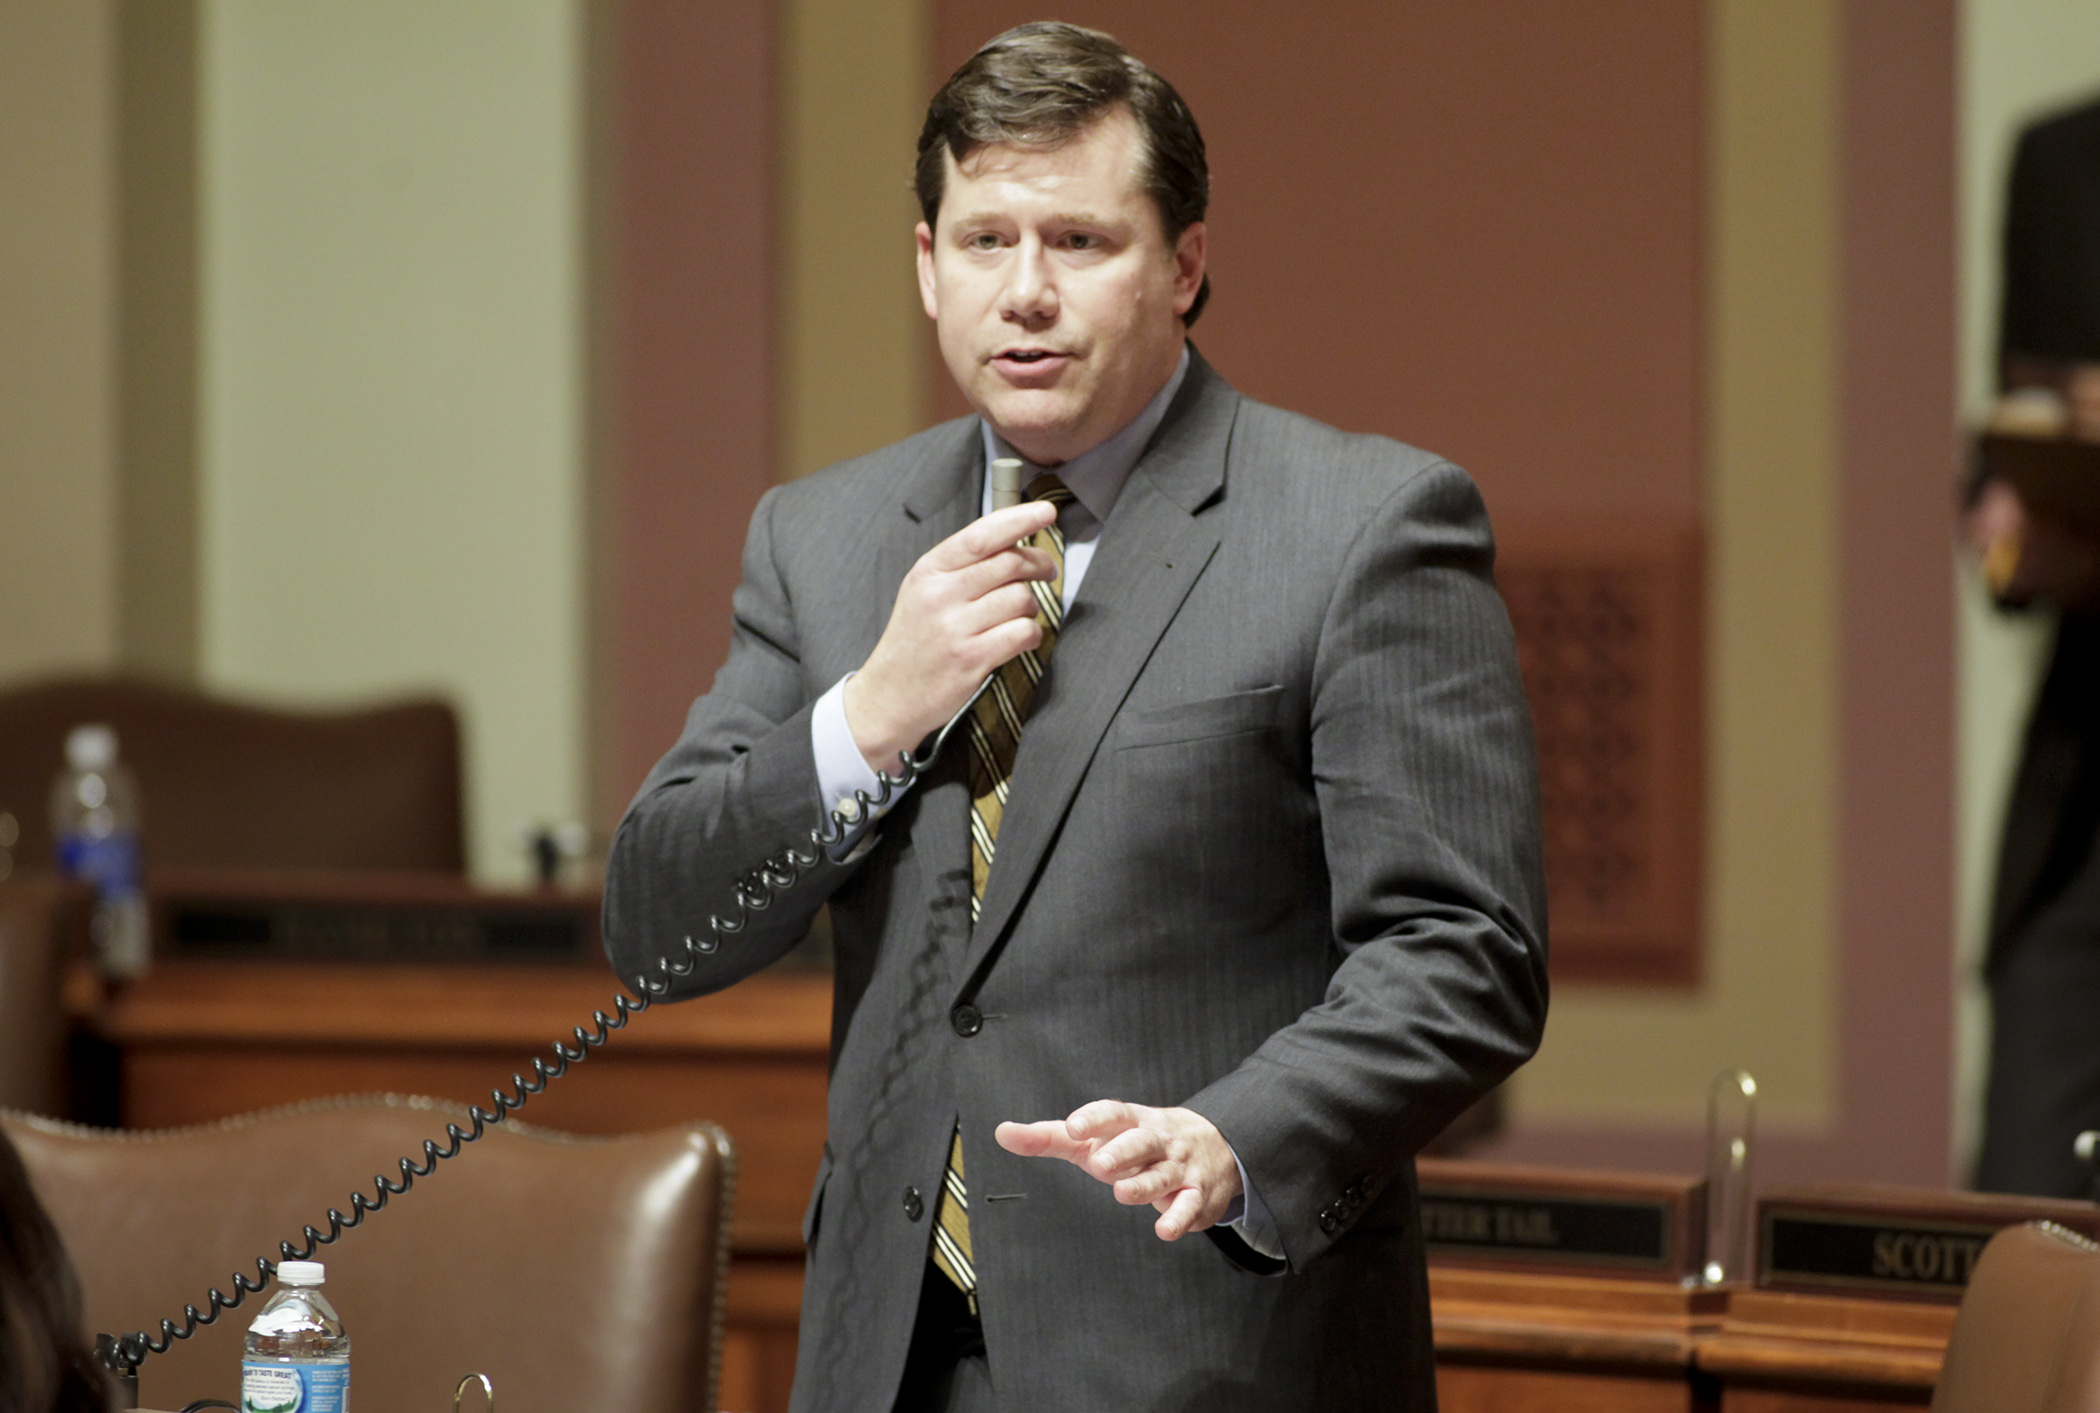 Rep. Dennis Smith discusses HF1732/SF1646*, the Real ID bill, on the House Floor March 29. The bill was passed, as amended, 125-2. Photo by Paul Battaglia